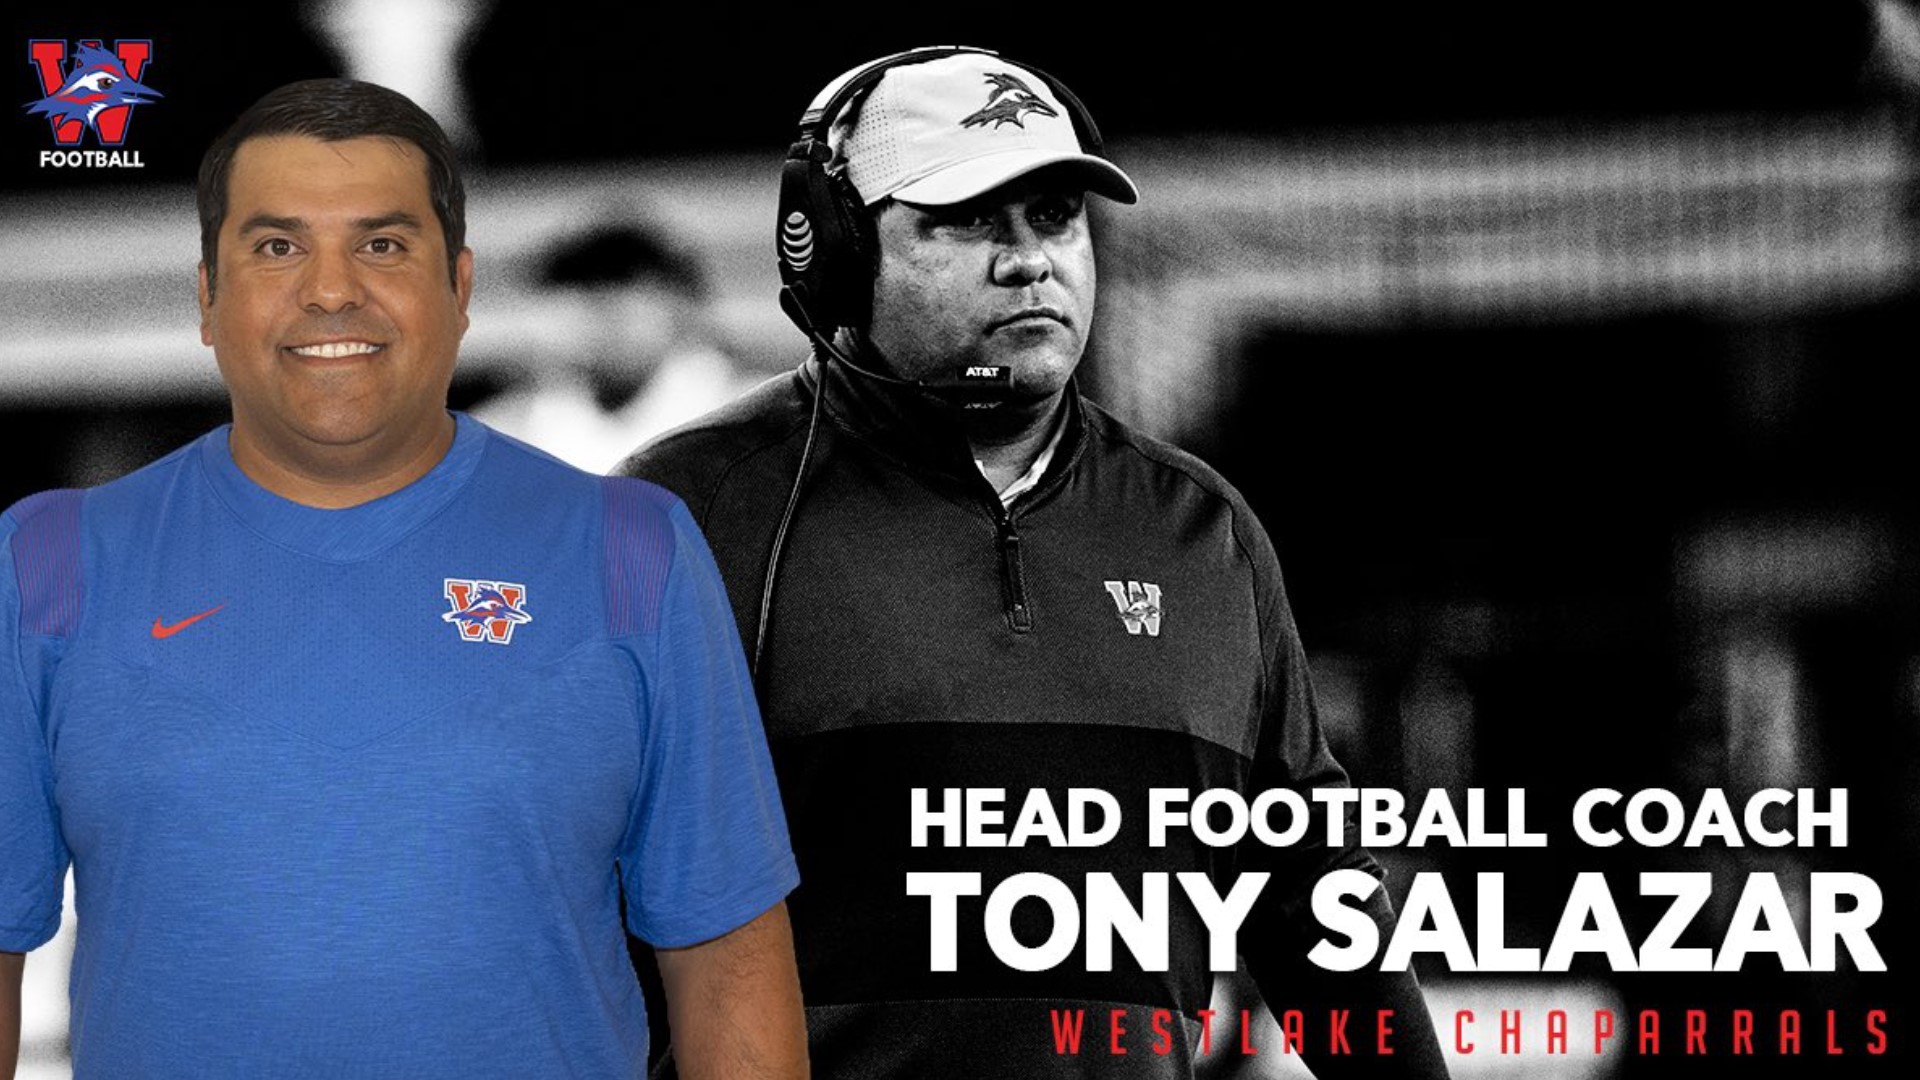 Tony Salazar takes the lead of the Chaps while Phil Dawson signs on to be the head coach at Hyde Park.